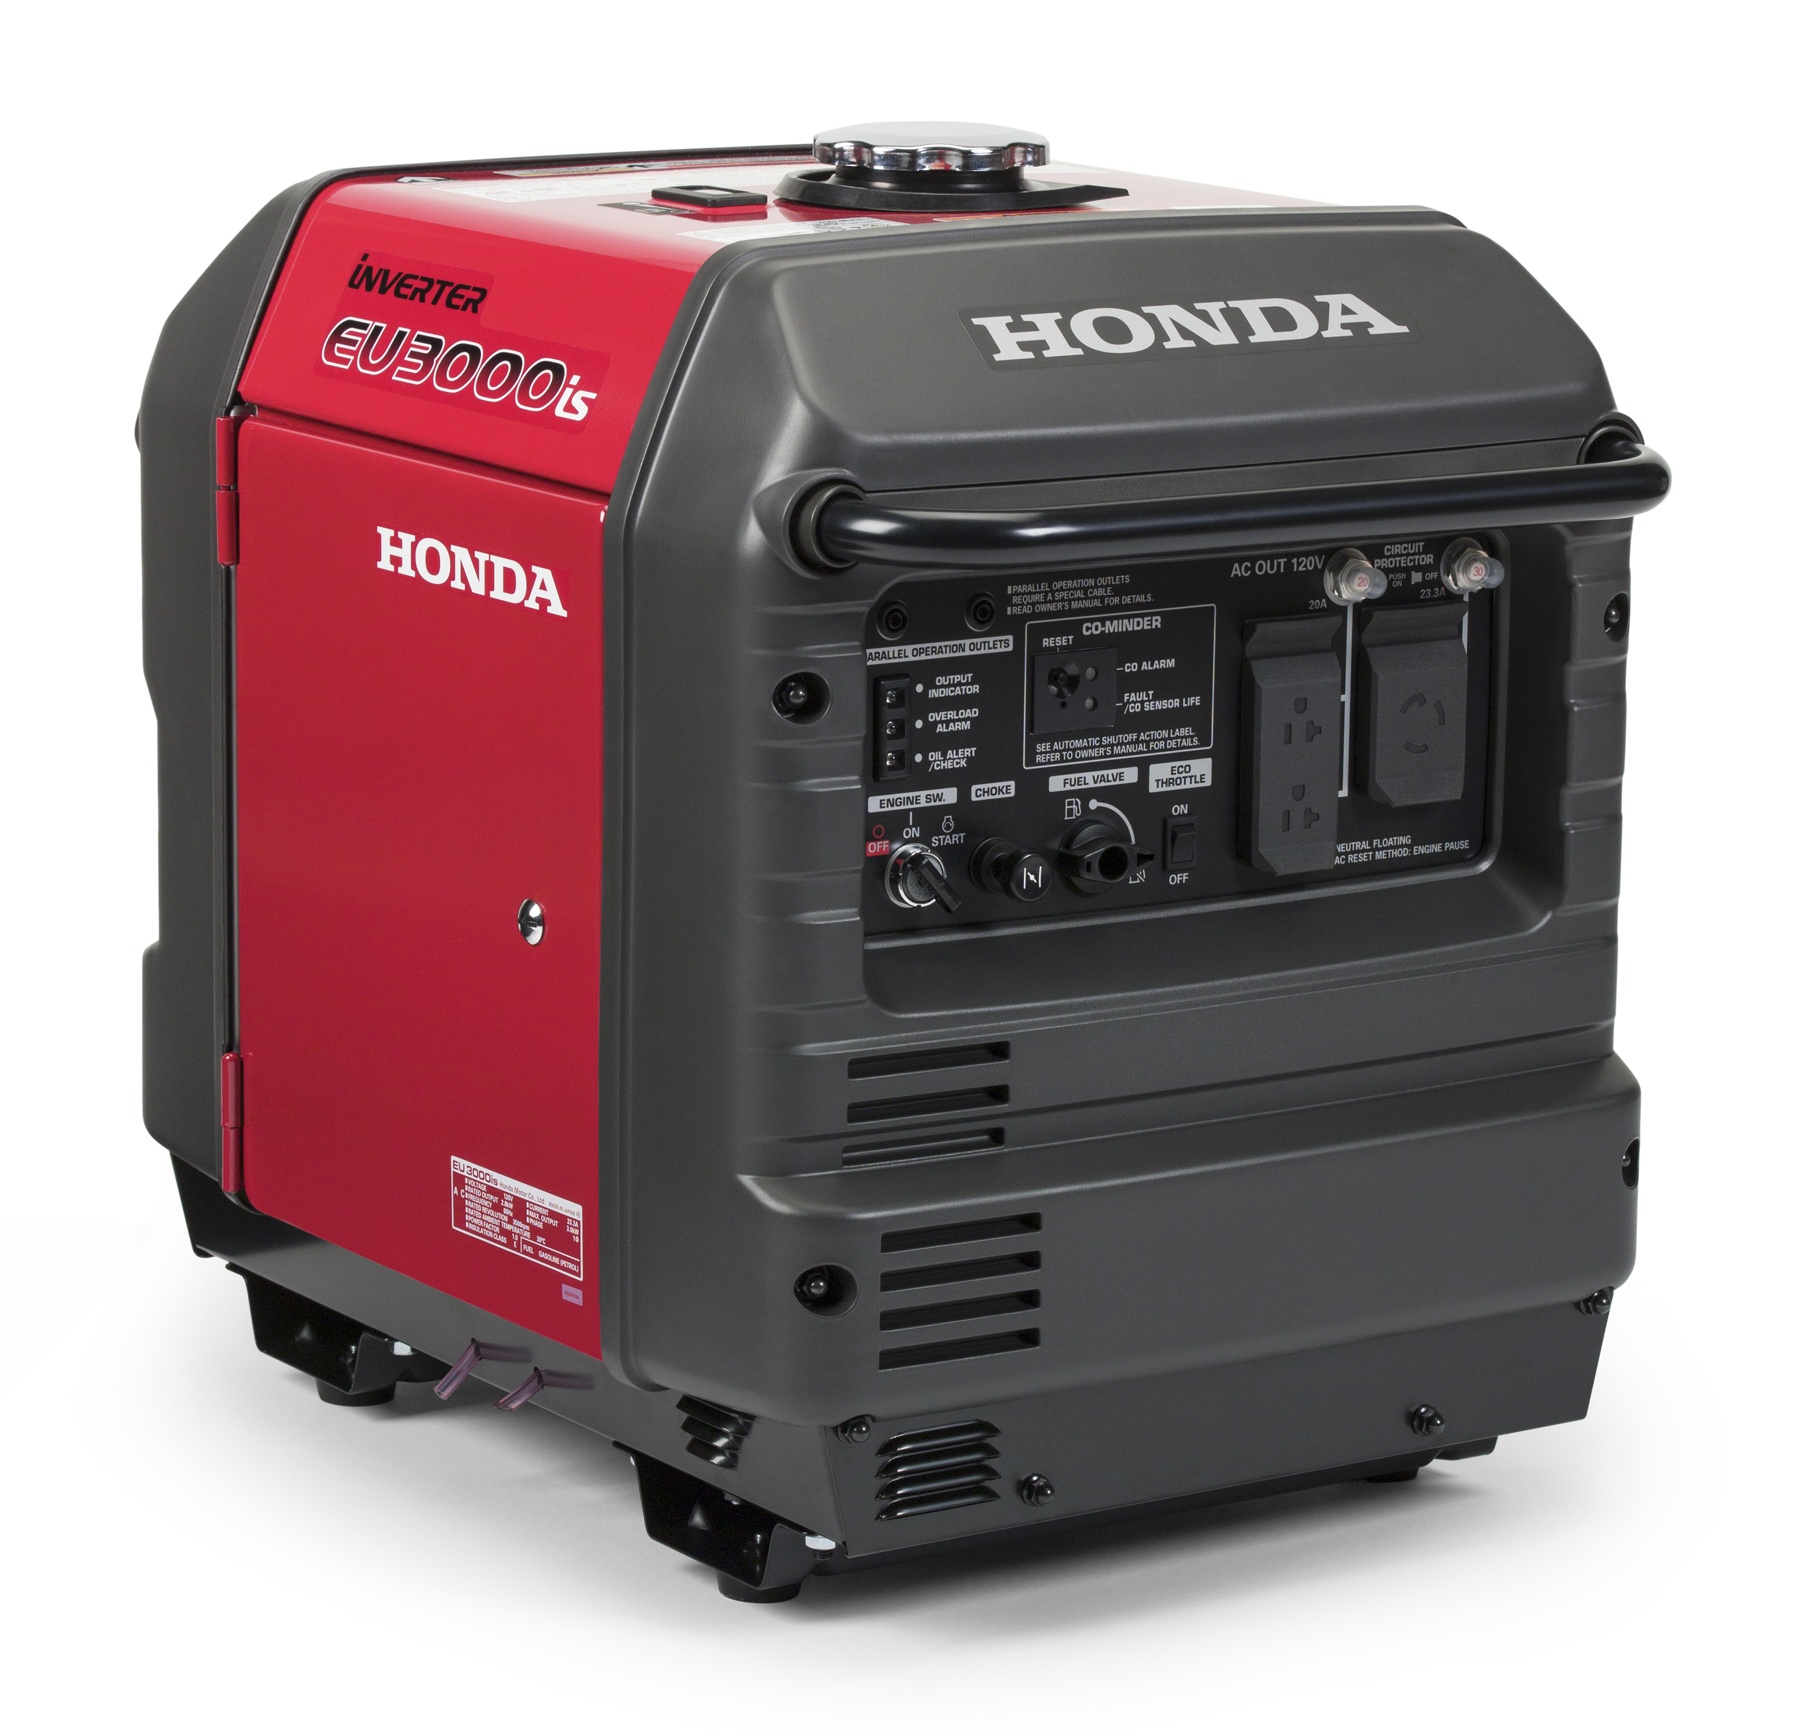 New From Honda: Carbon Monoxide Detection System